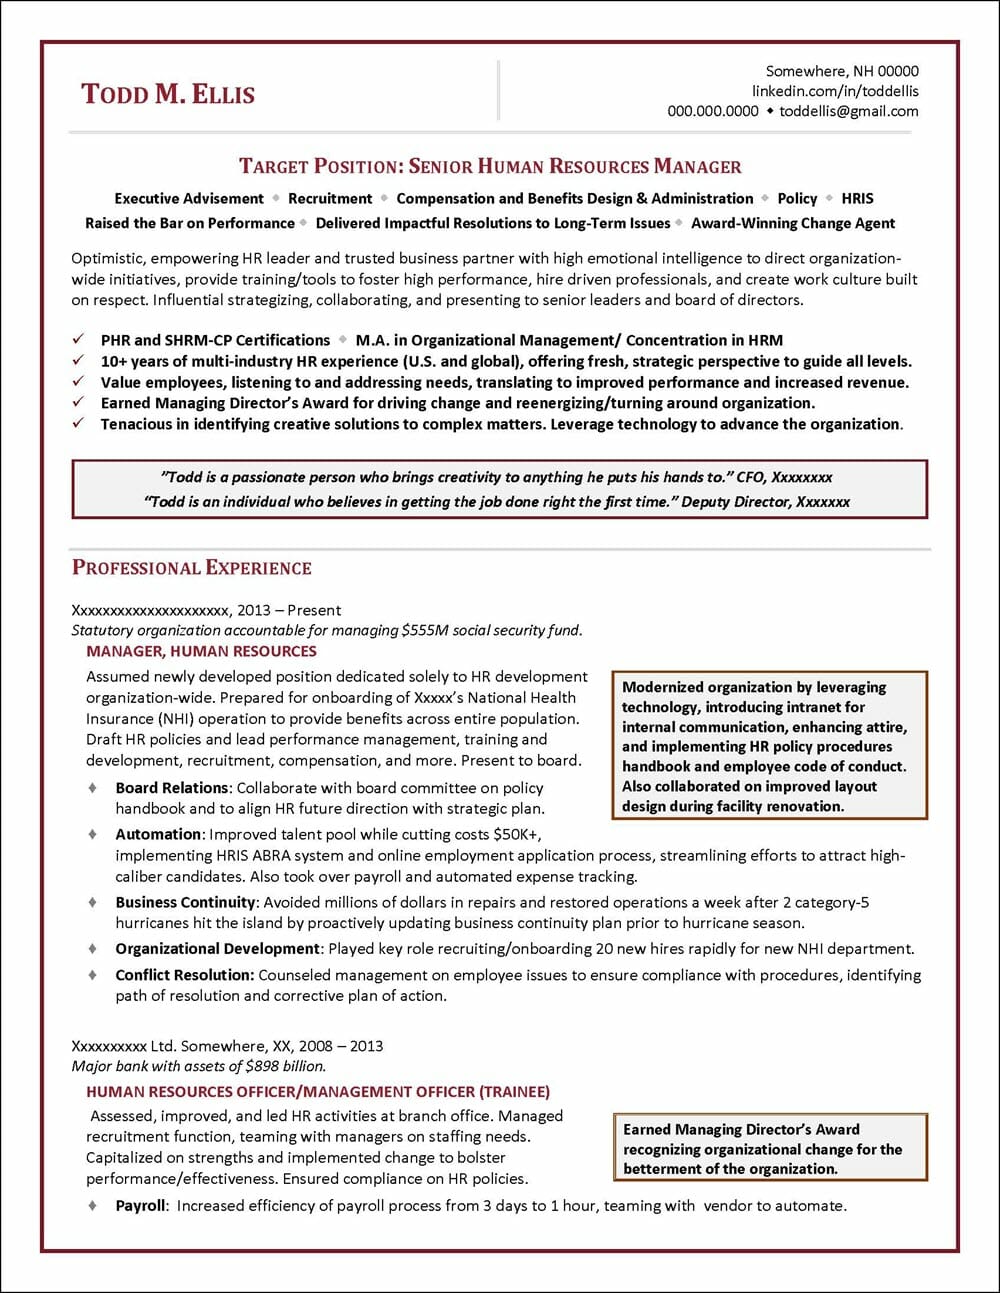 Senior Human Resources Manager Resume Page 1